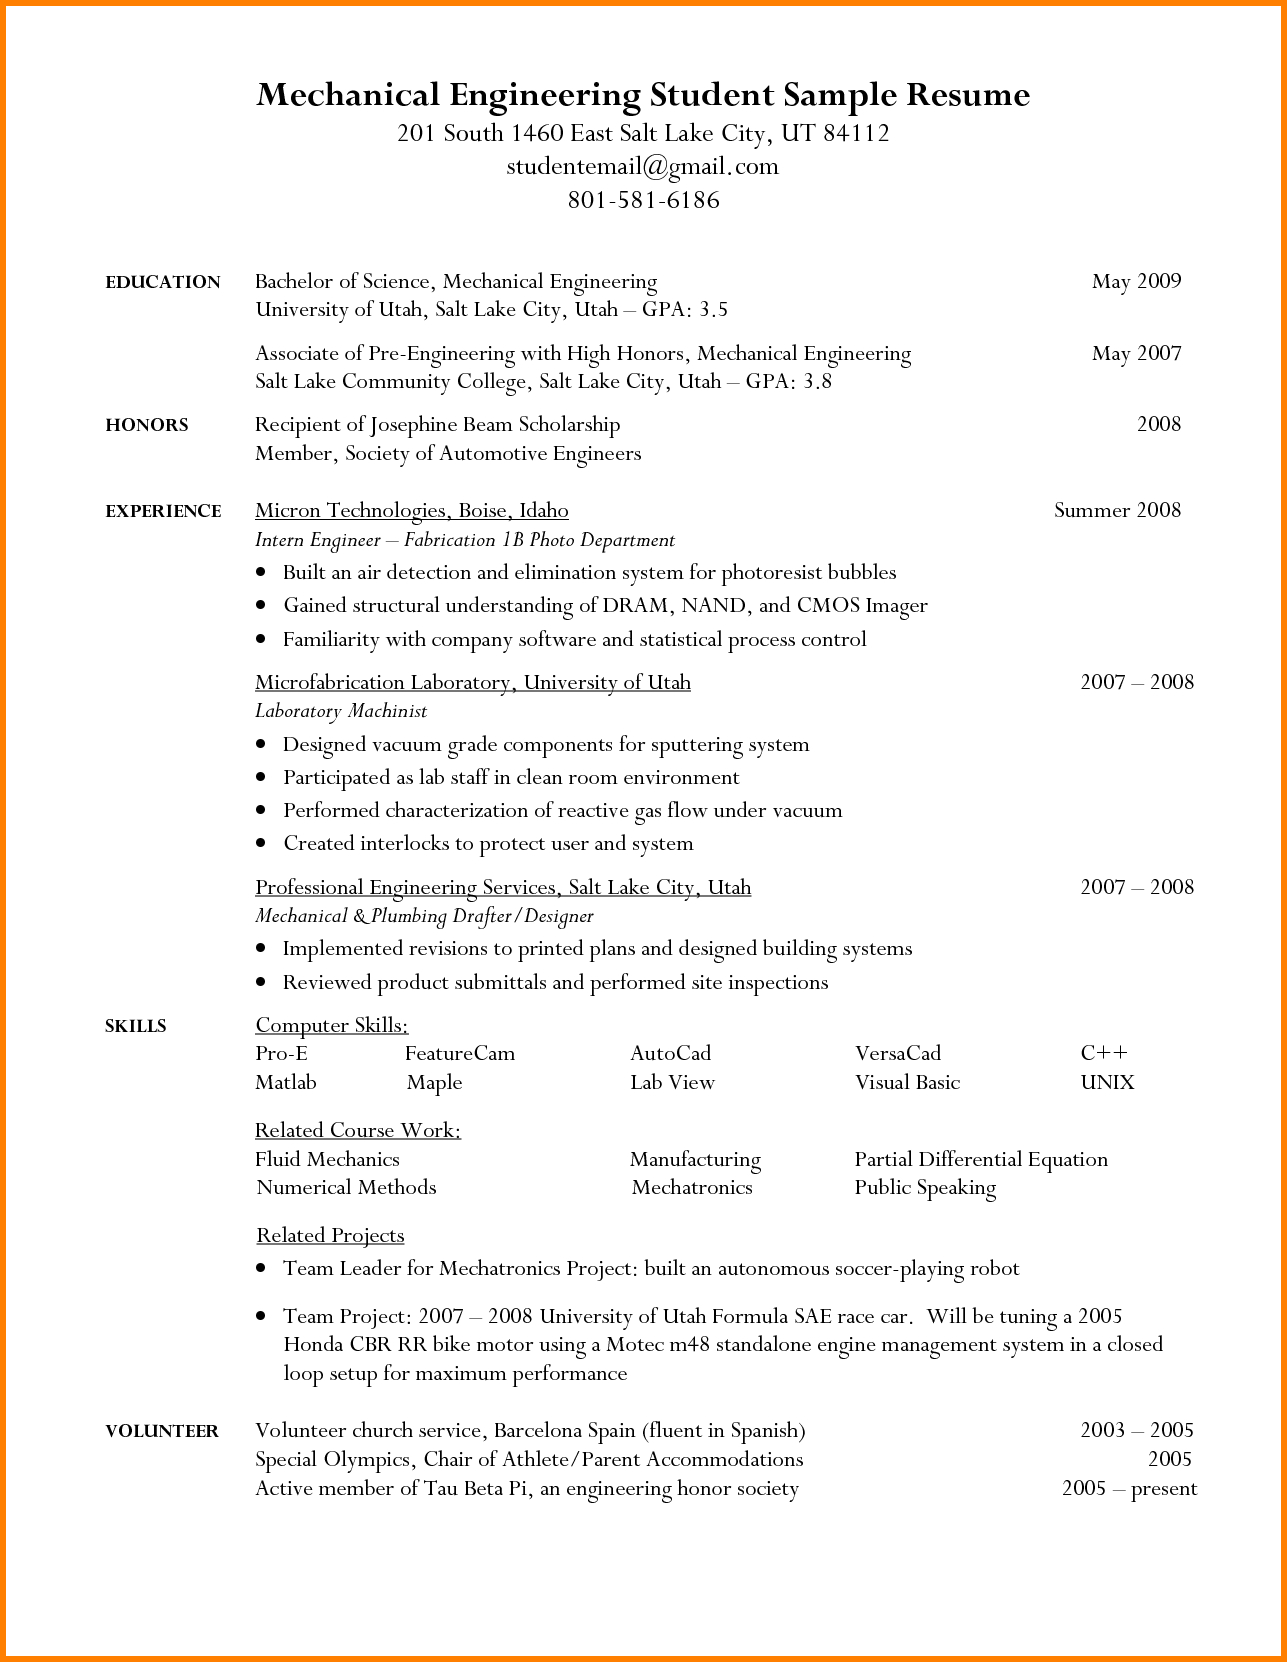 Student Resume Template 10 Engineering Student Resume Template Penn Working Papers